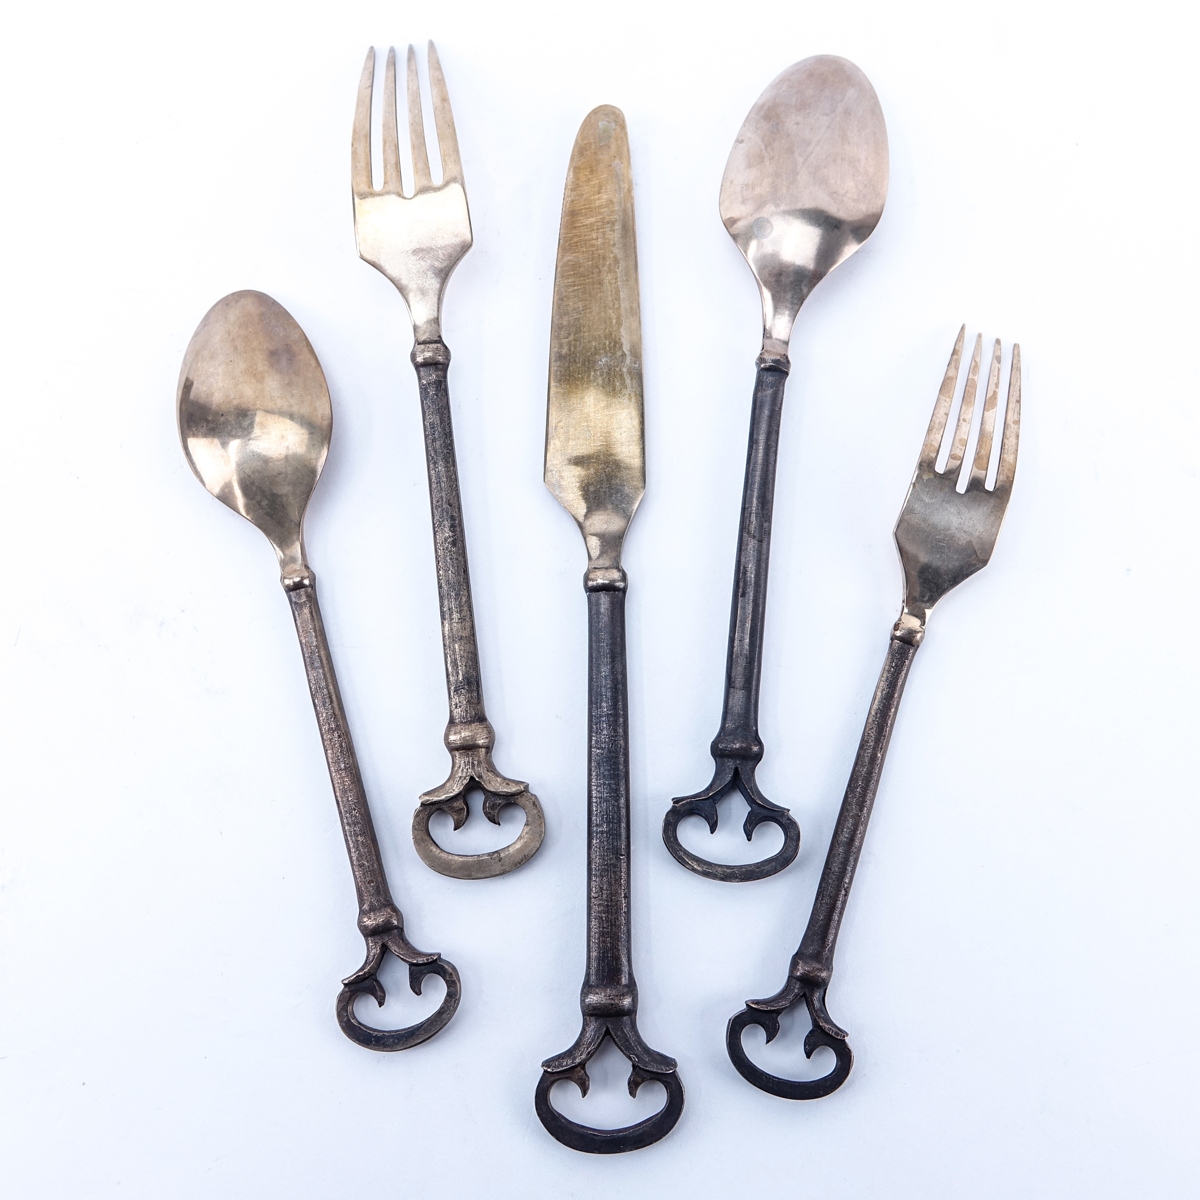 Forty (40) Piece Set Antique Solid Brass Flatware. Includes 8 each: forks 8-1/8", knives 9-1/2", salad forks, place spoons, teaspoons.